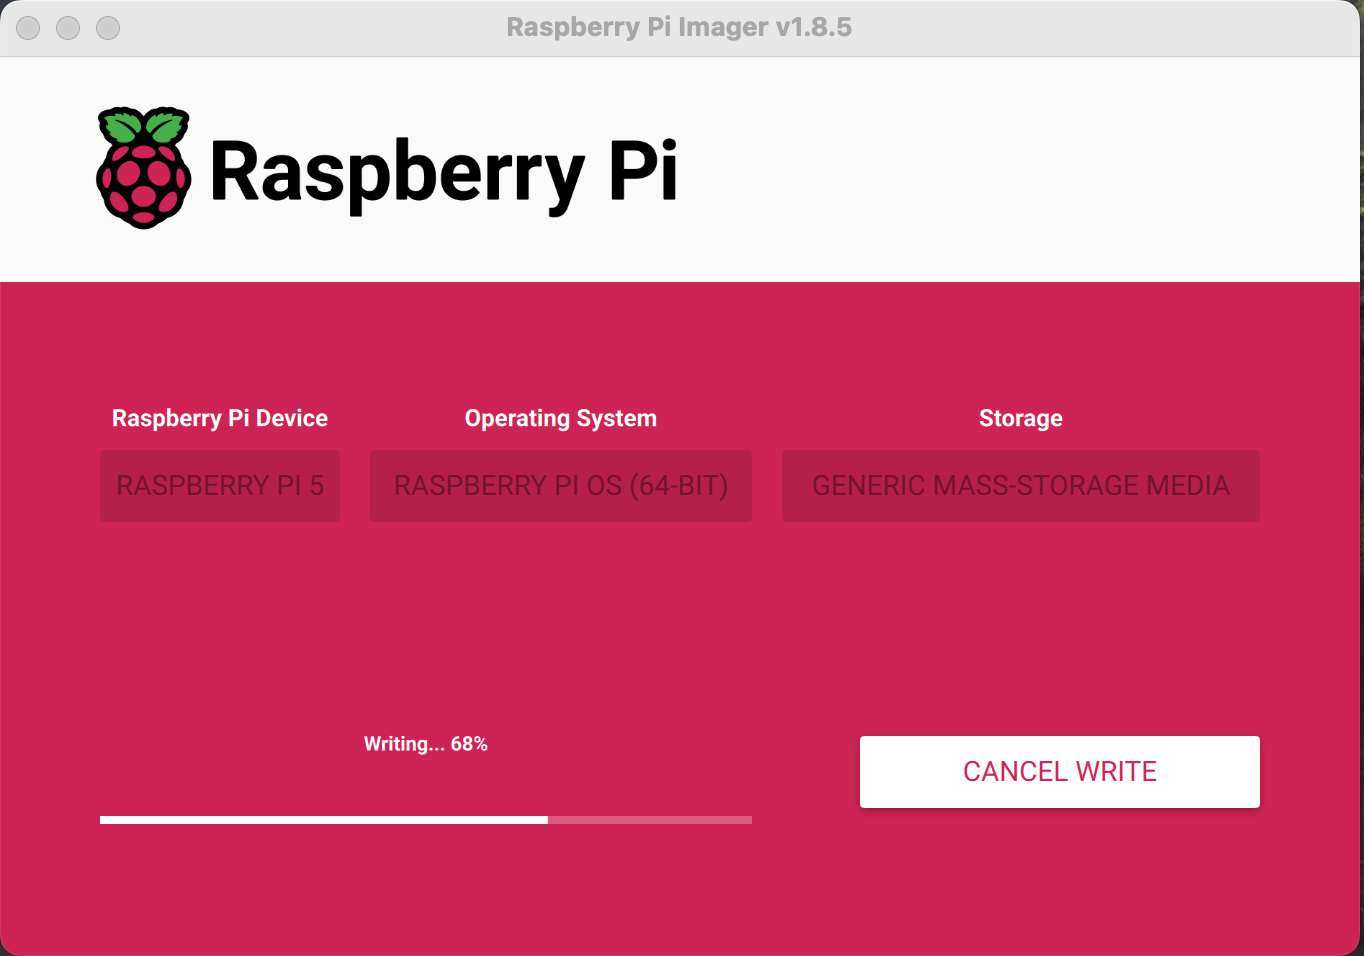 Raspberry-pi-imager.png